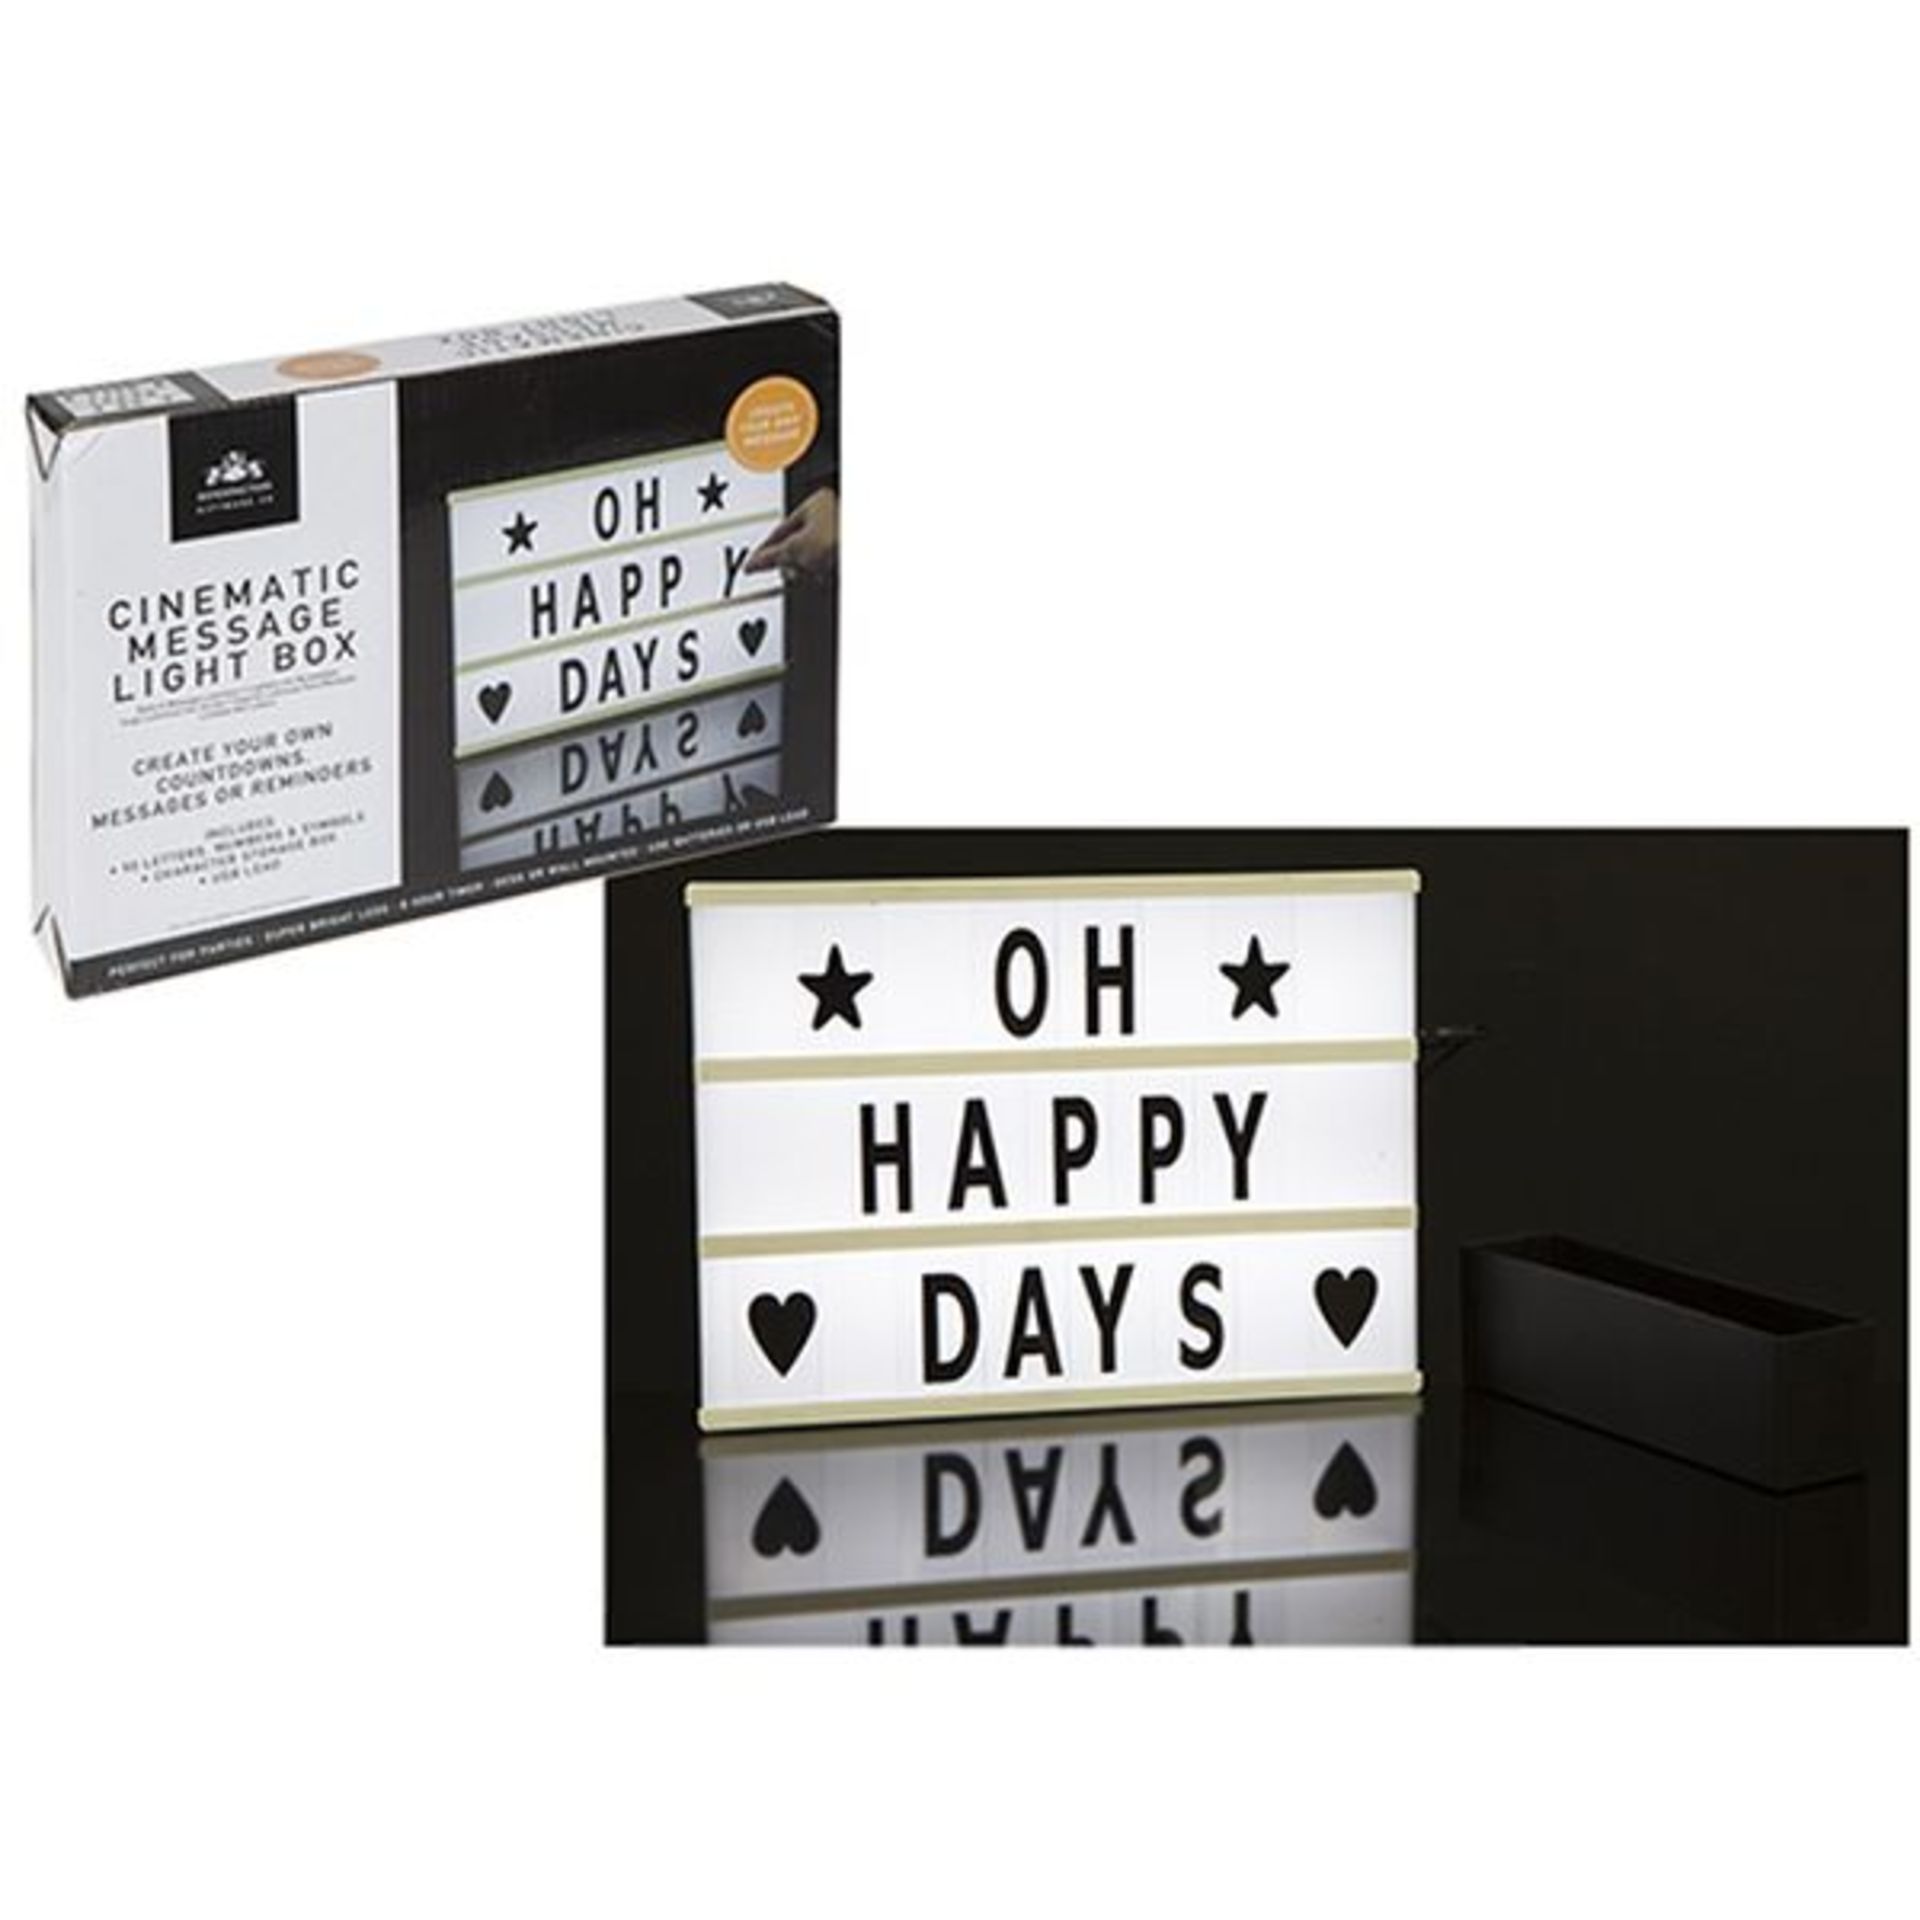 V *TRADE QTY* Brand New Electric Vintage Style Cinematic Message Box With Back Light - Create Your